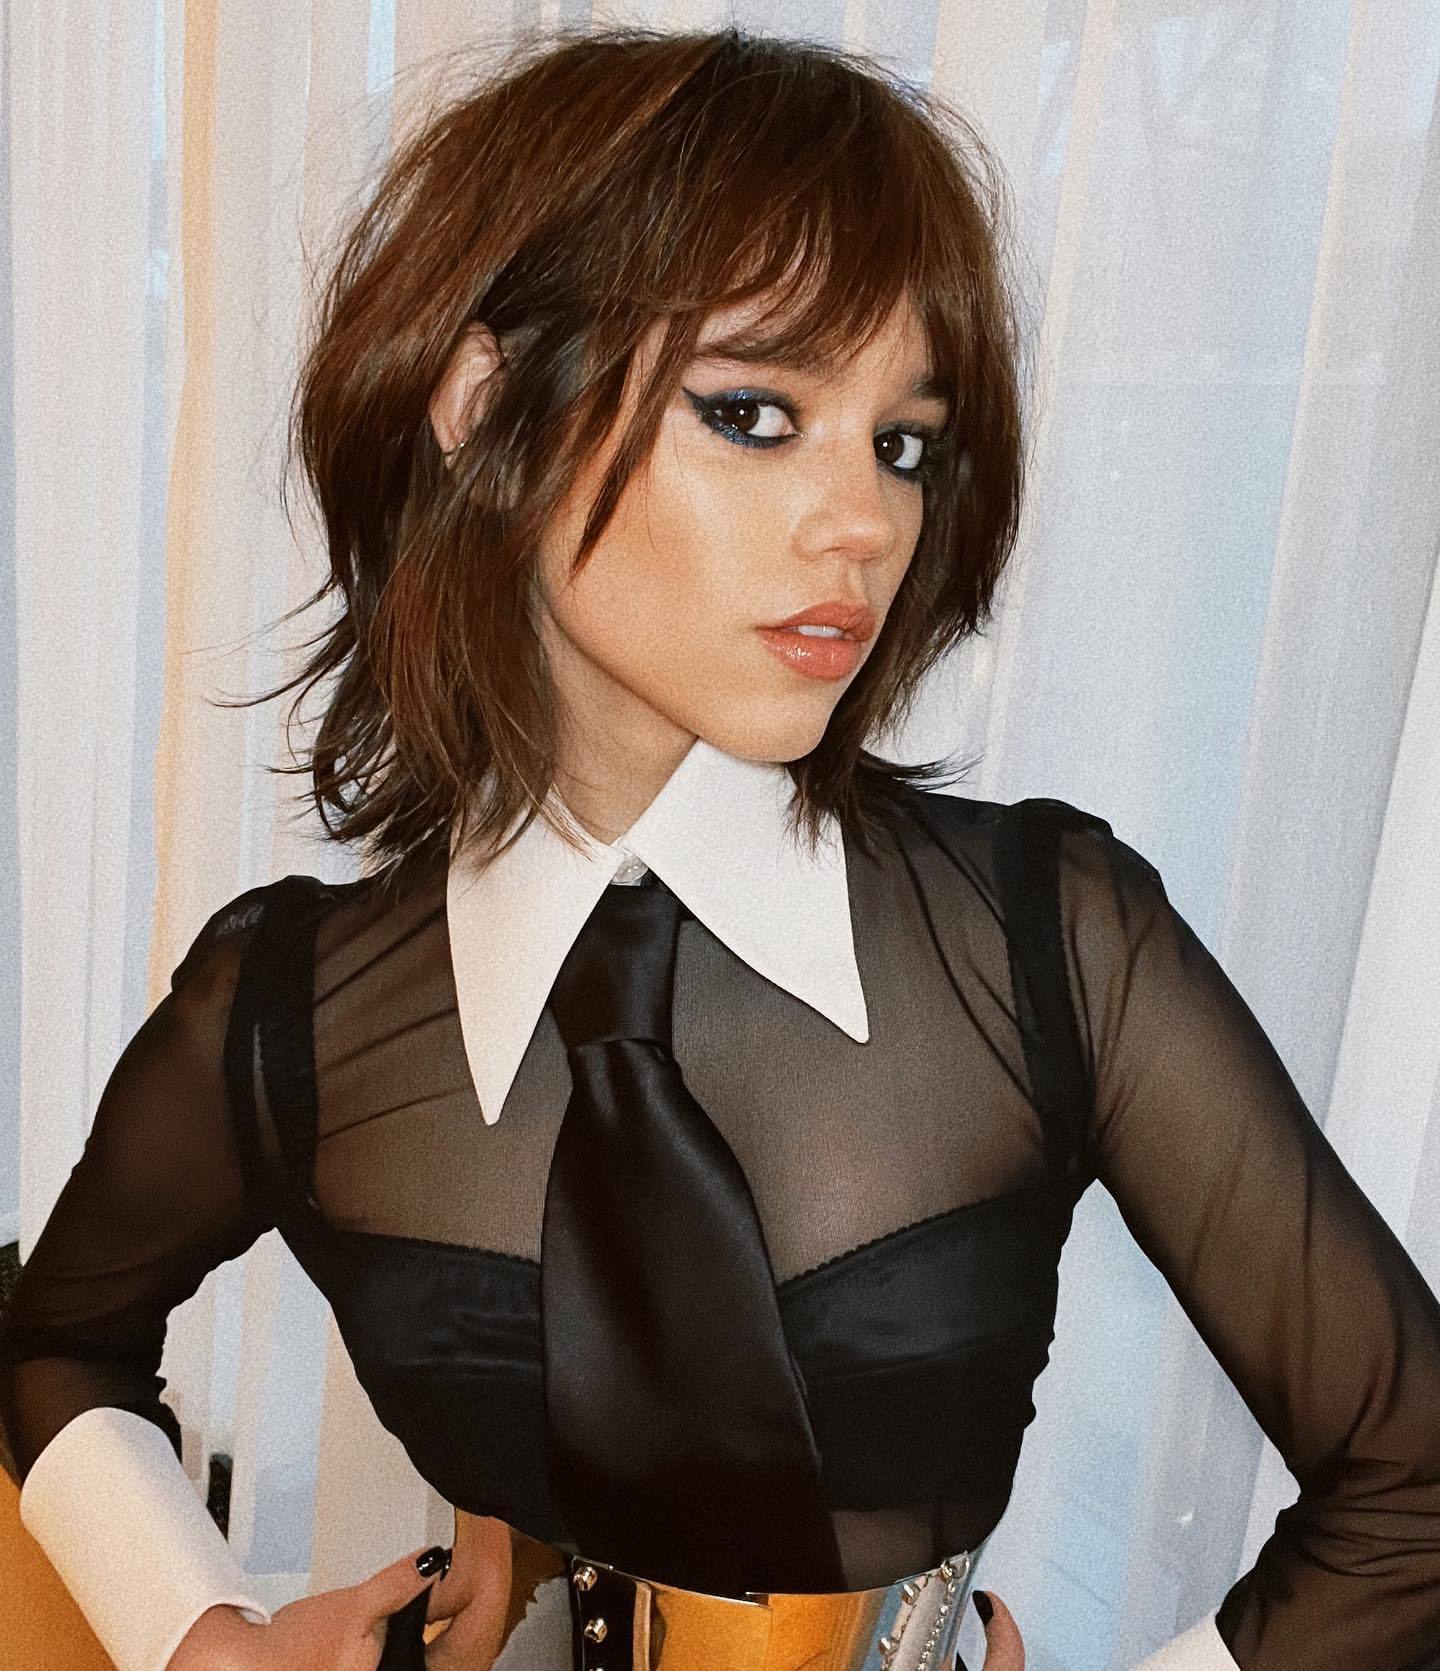 Photos n°4 : Jenna Ortega is Cinched in Silver!